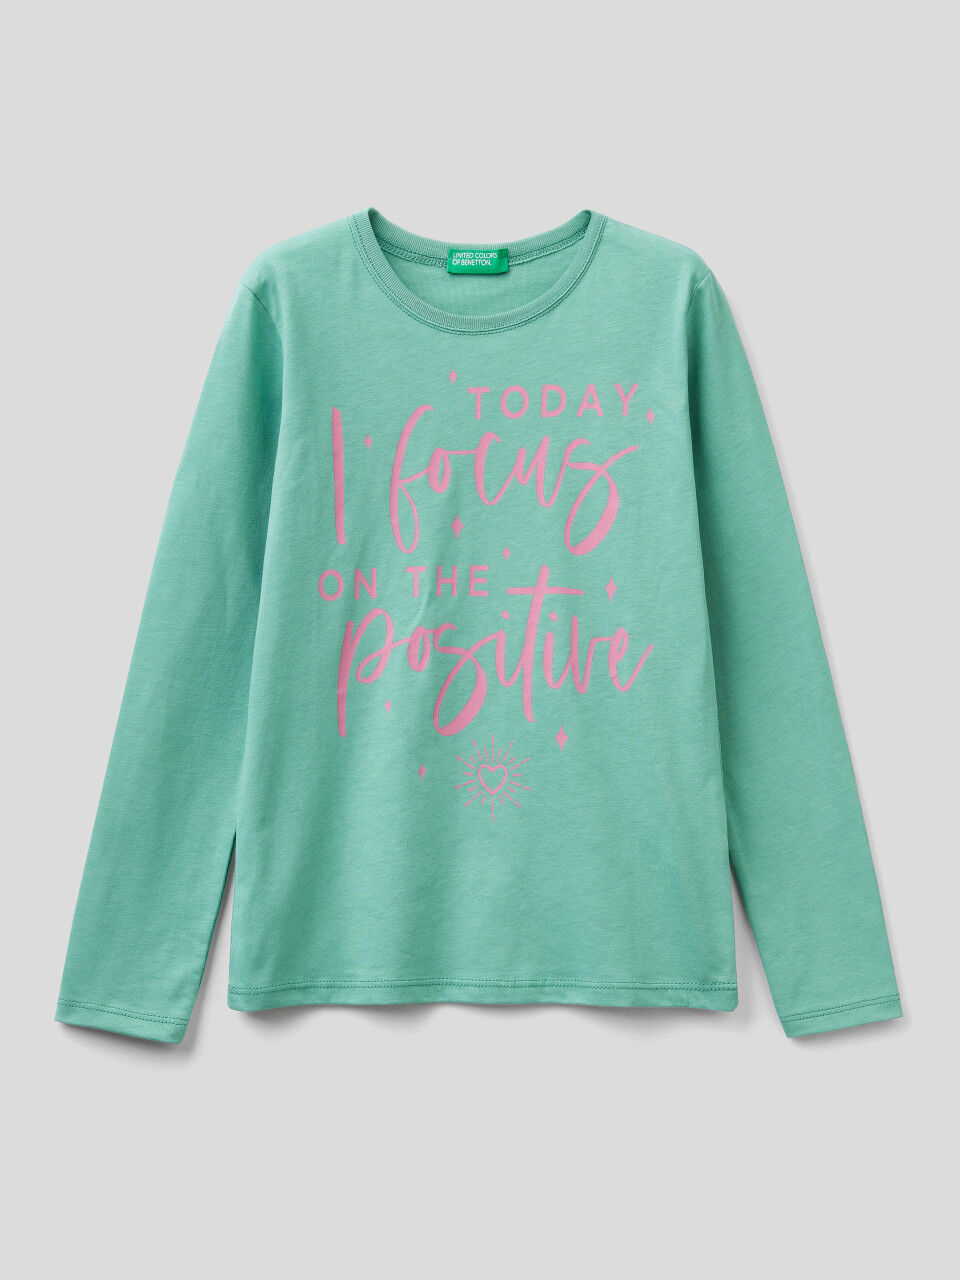 Junior Girls' T-shirts and Shirts Collection 2022 | Benetton